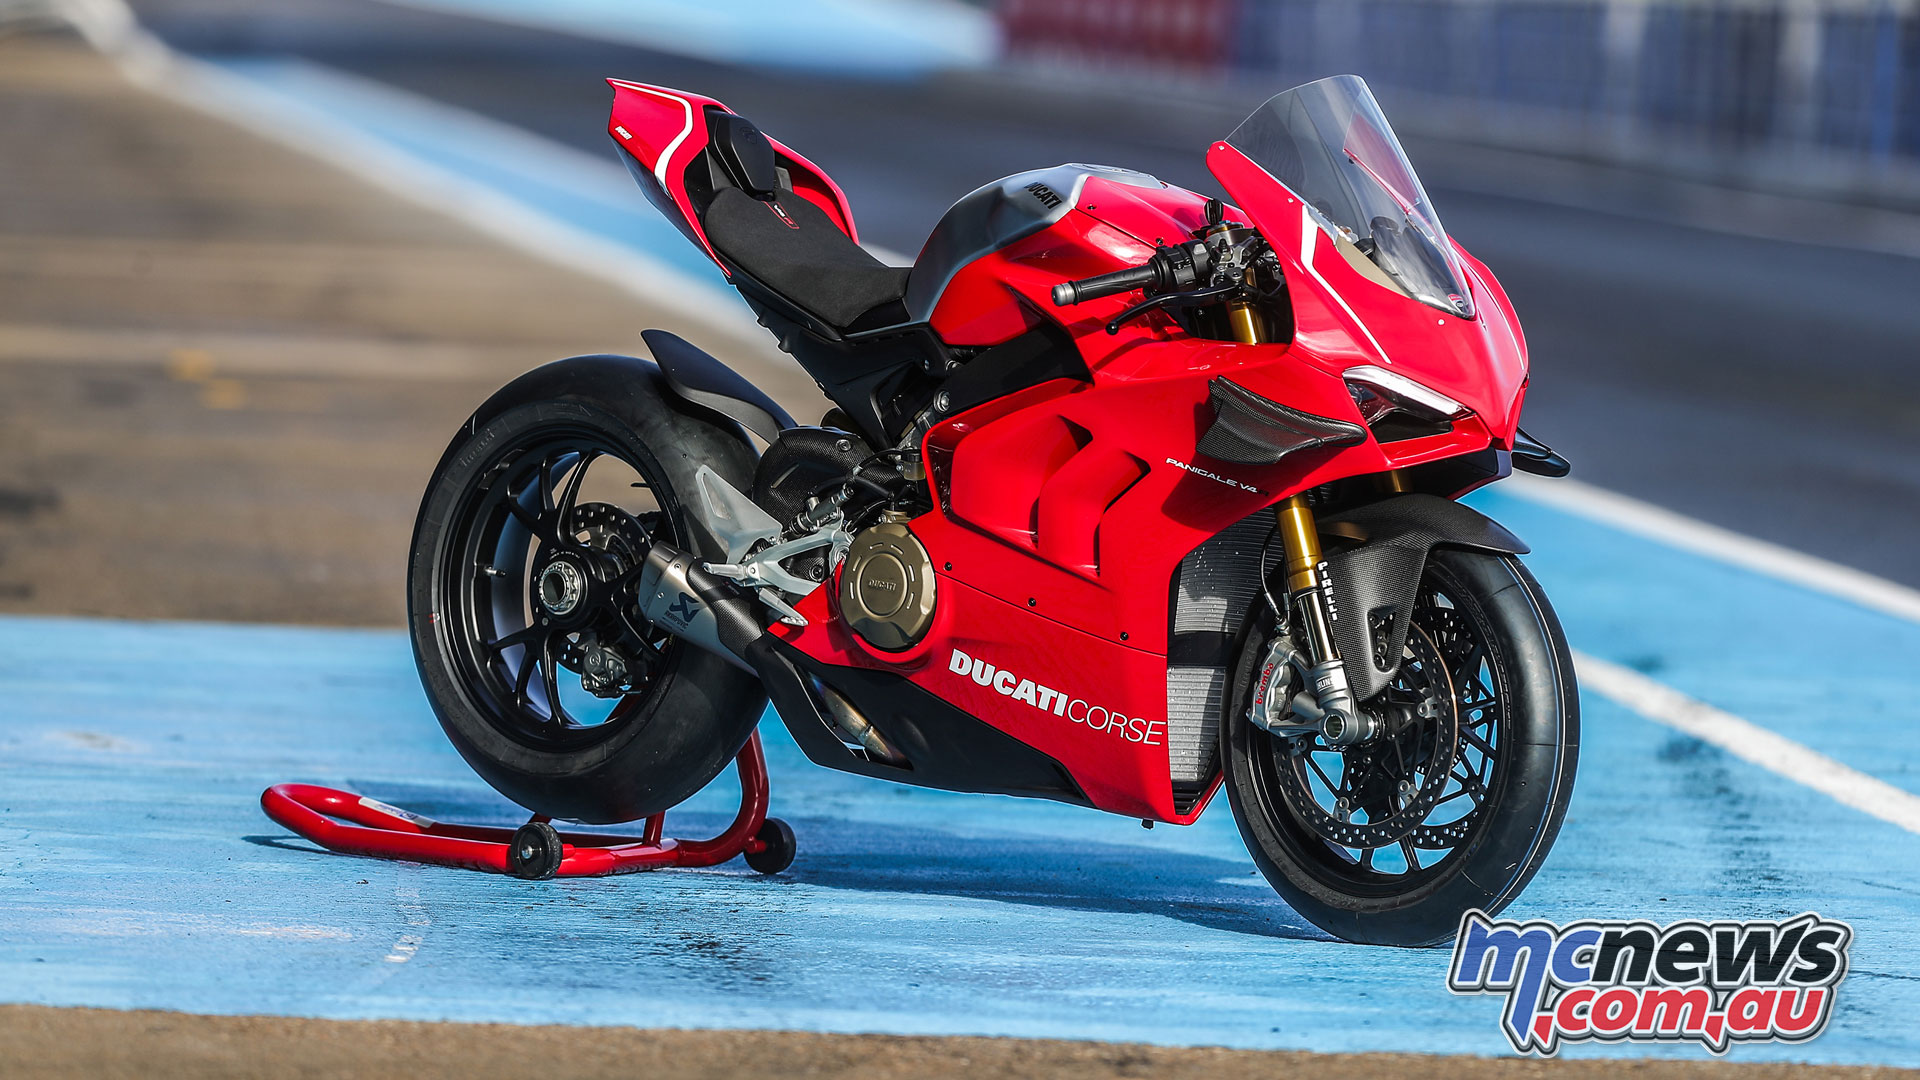 2019 Ducati Panigale V4 R 998cc Racer More Tech Details Motorcycle News Sport And Reviews